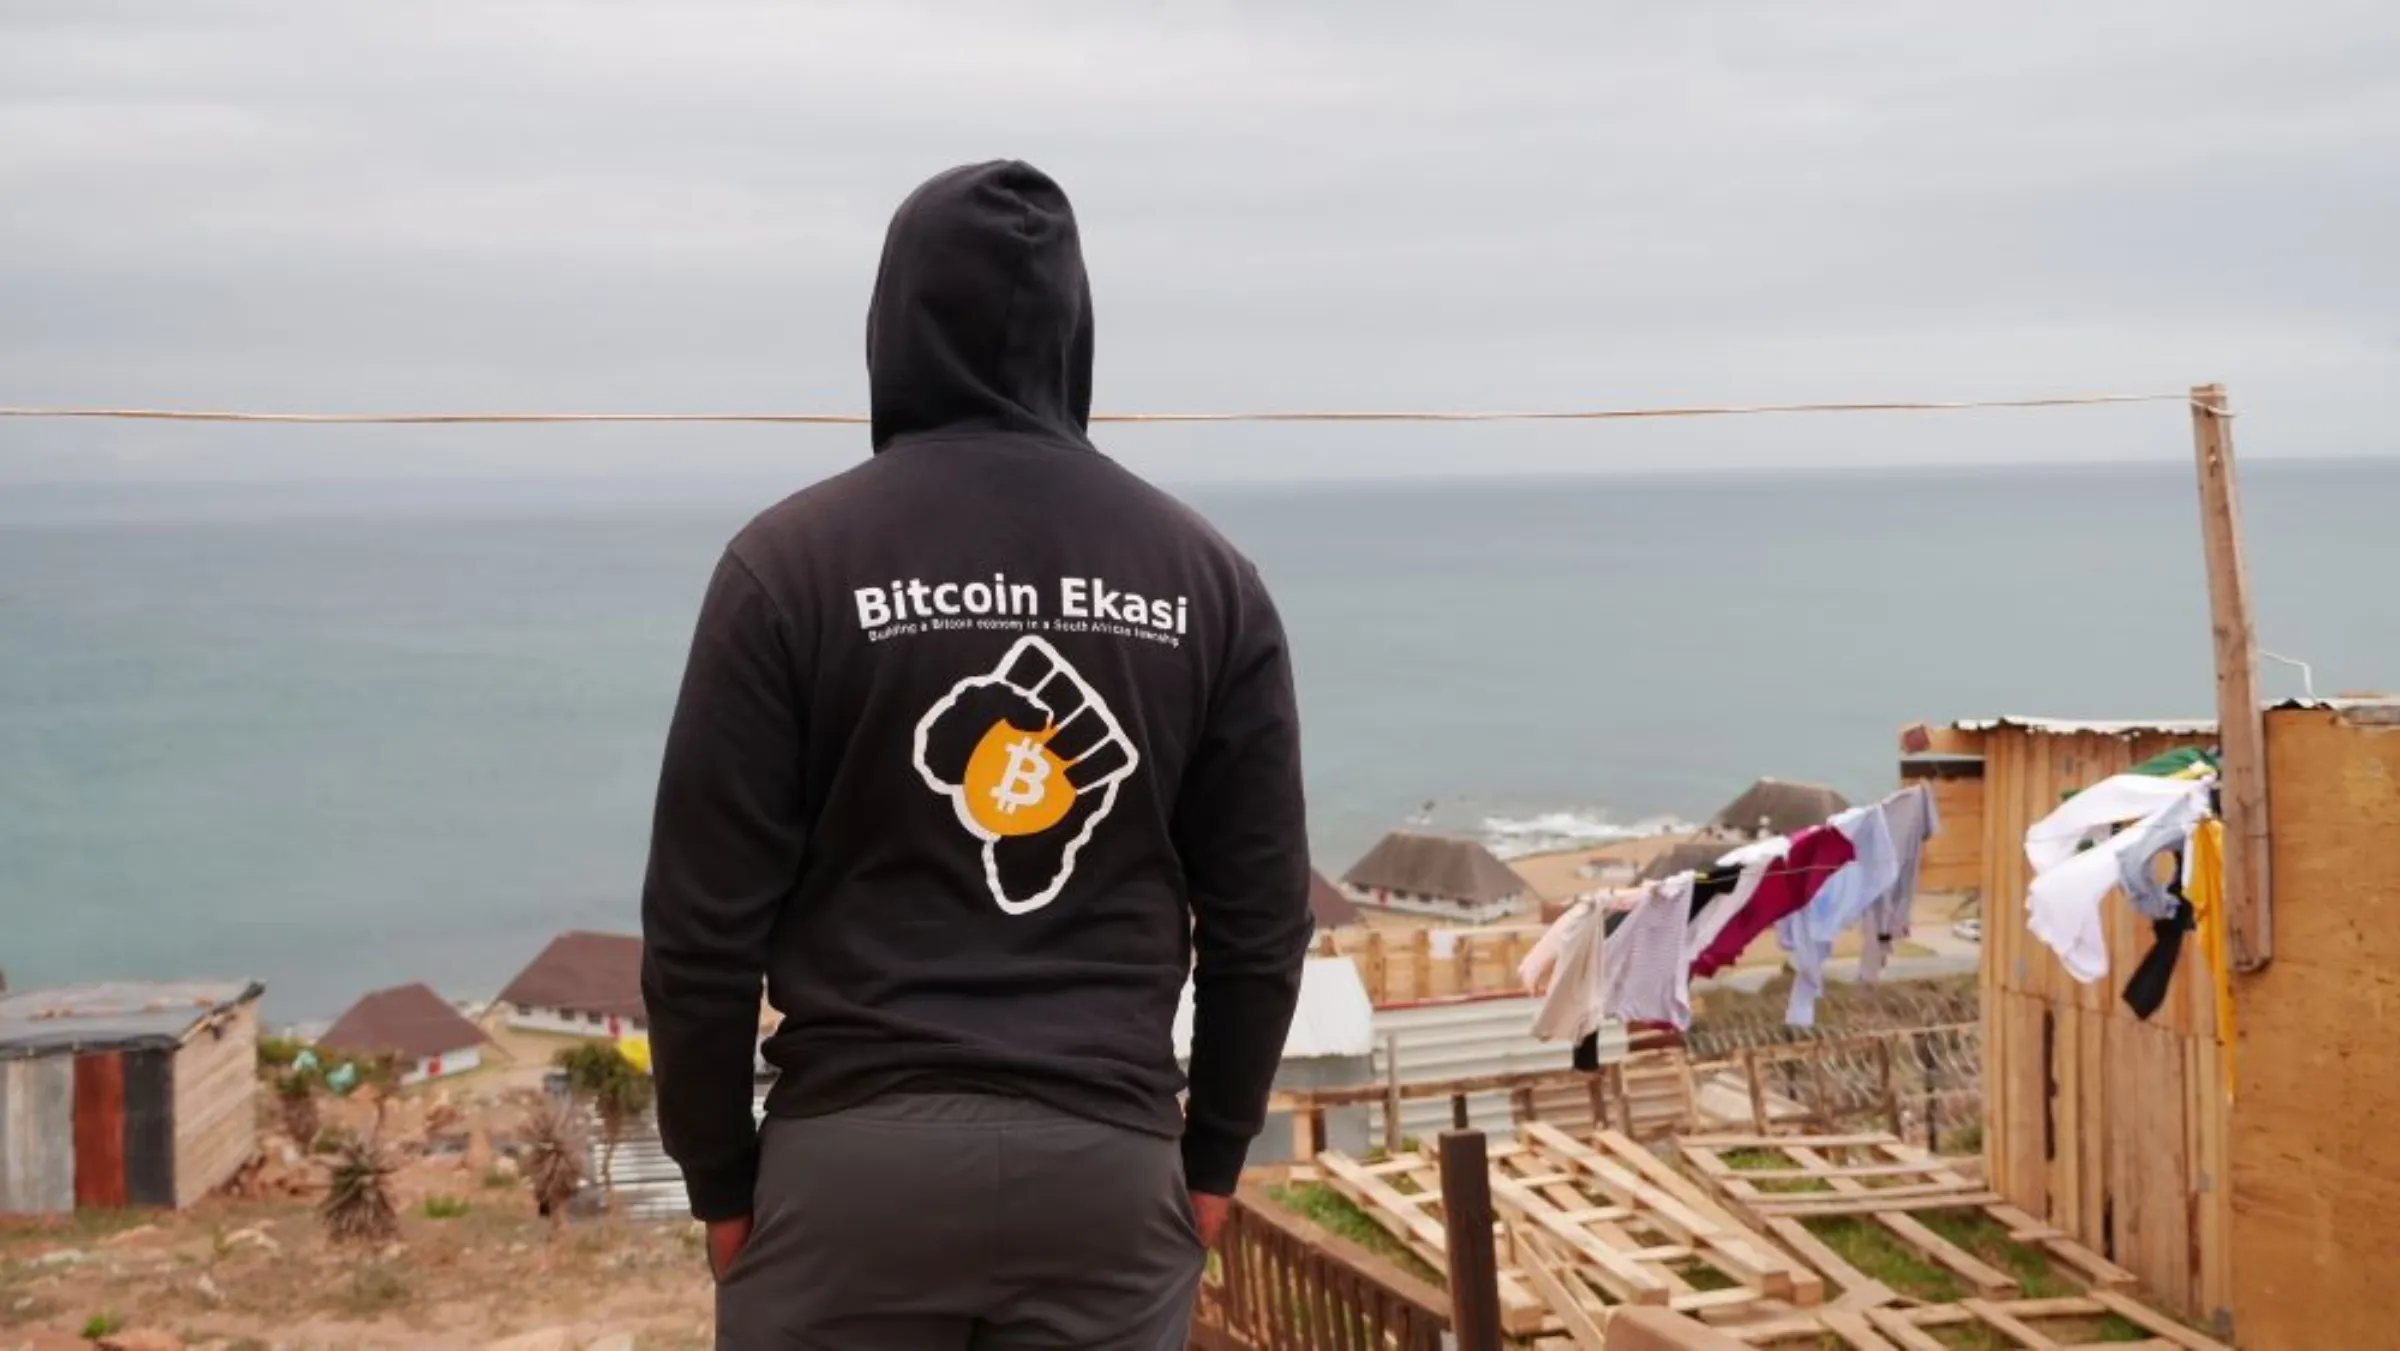 Luthando Ndabambi looks out over JCC township and the Atlantic ocean wearing his bitcoin hoodie in Mossel Bay, South Africa, November 24, 2022